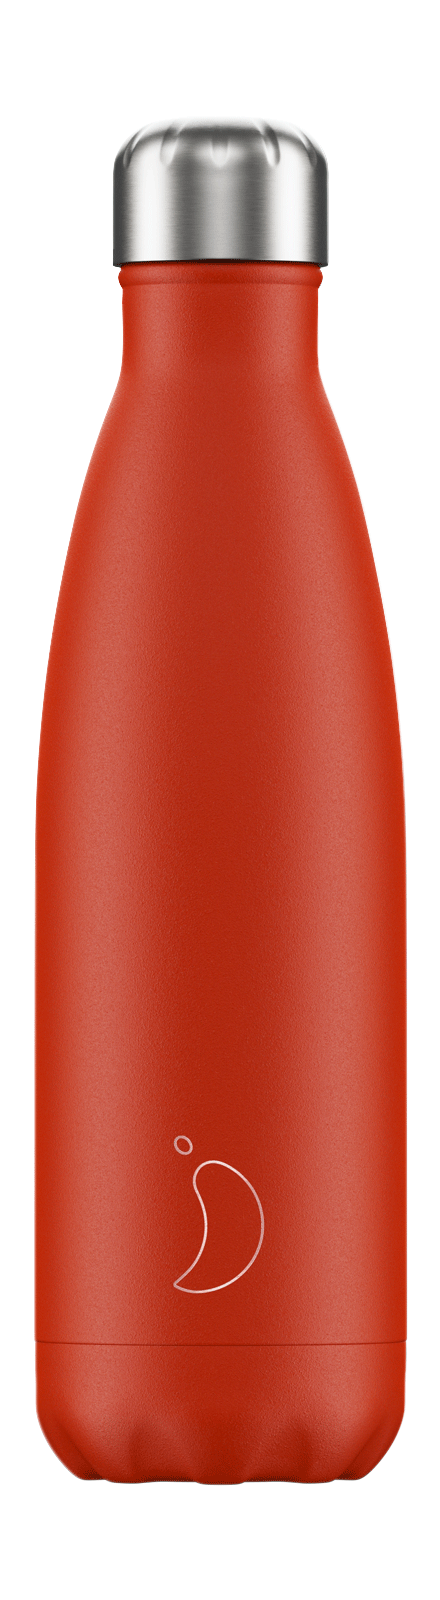 cadeauxwells - 500ml Chilly's Bottle - Neon Red - Chilly's Bottles - Homewares